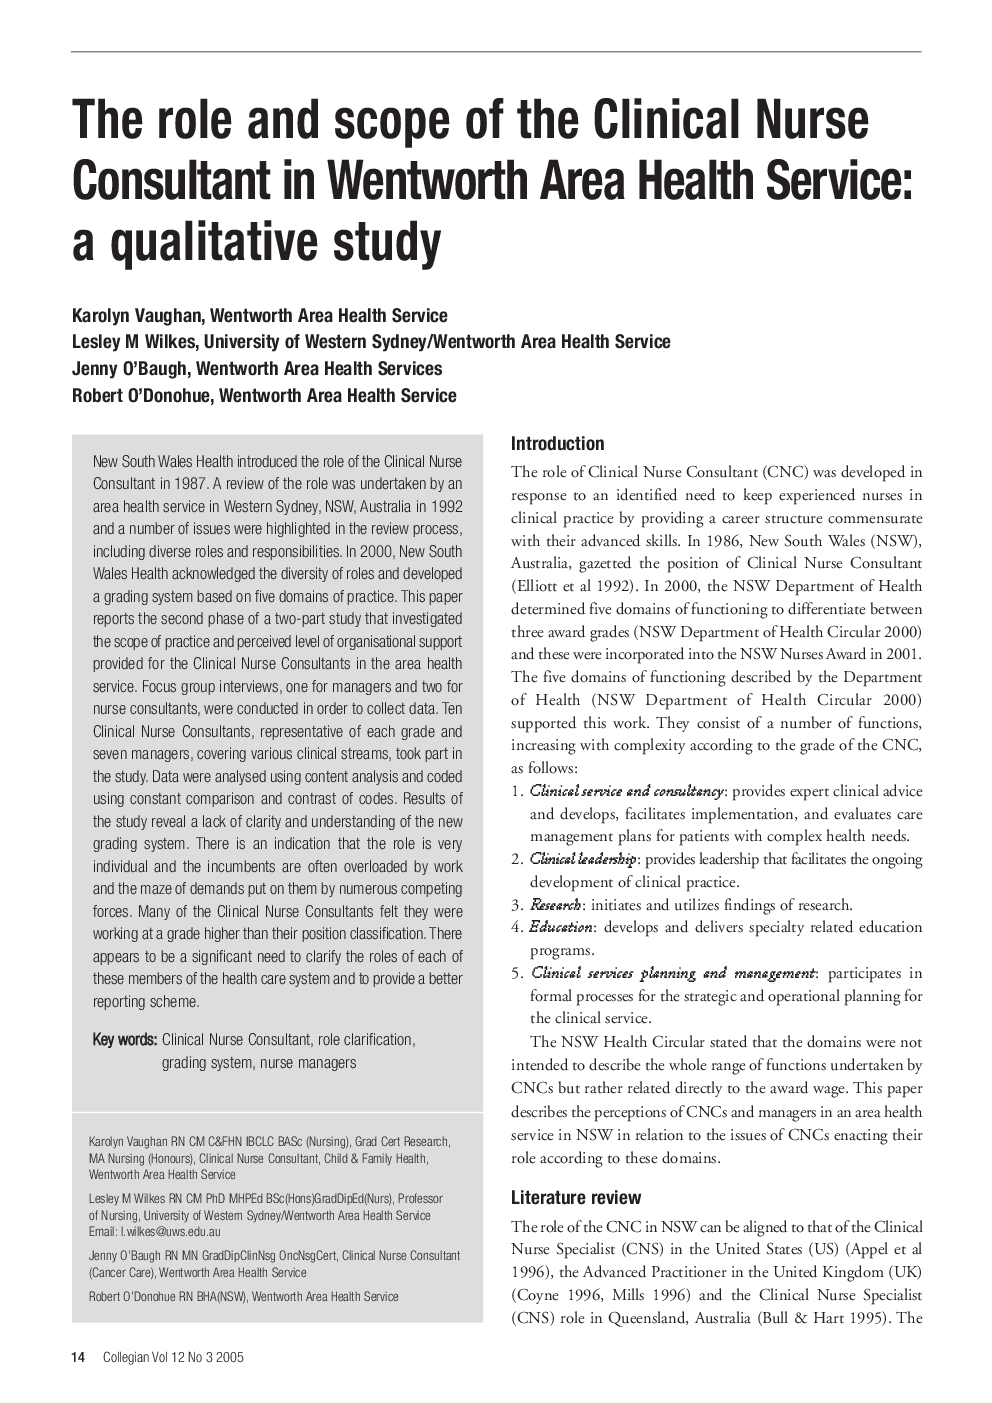 The role and scope of the Clinical Nurse Consultant in Wentworth Area Health Service: a qualitative study